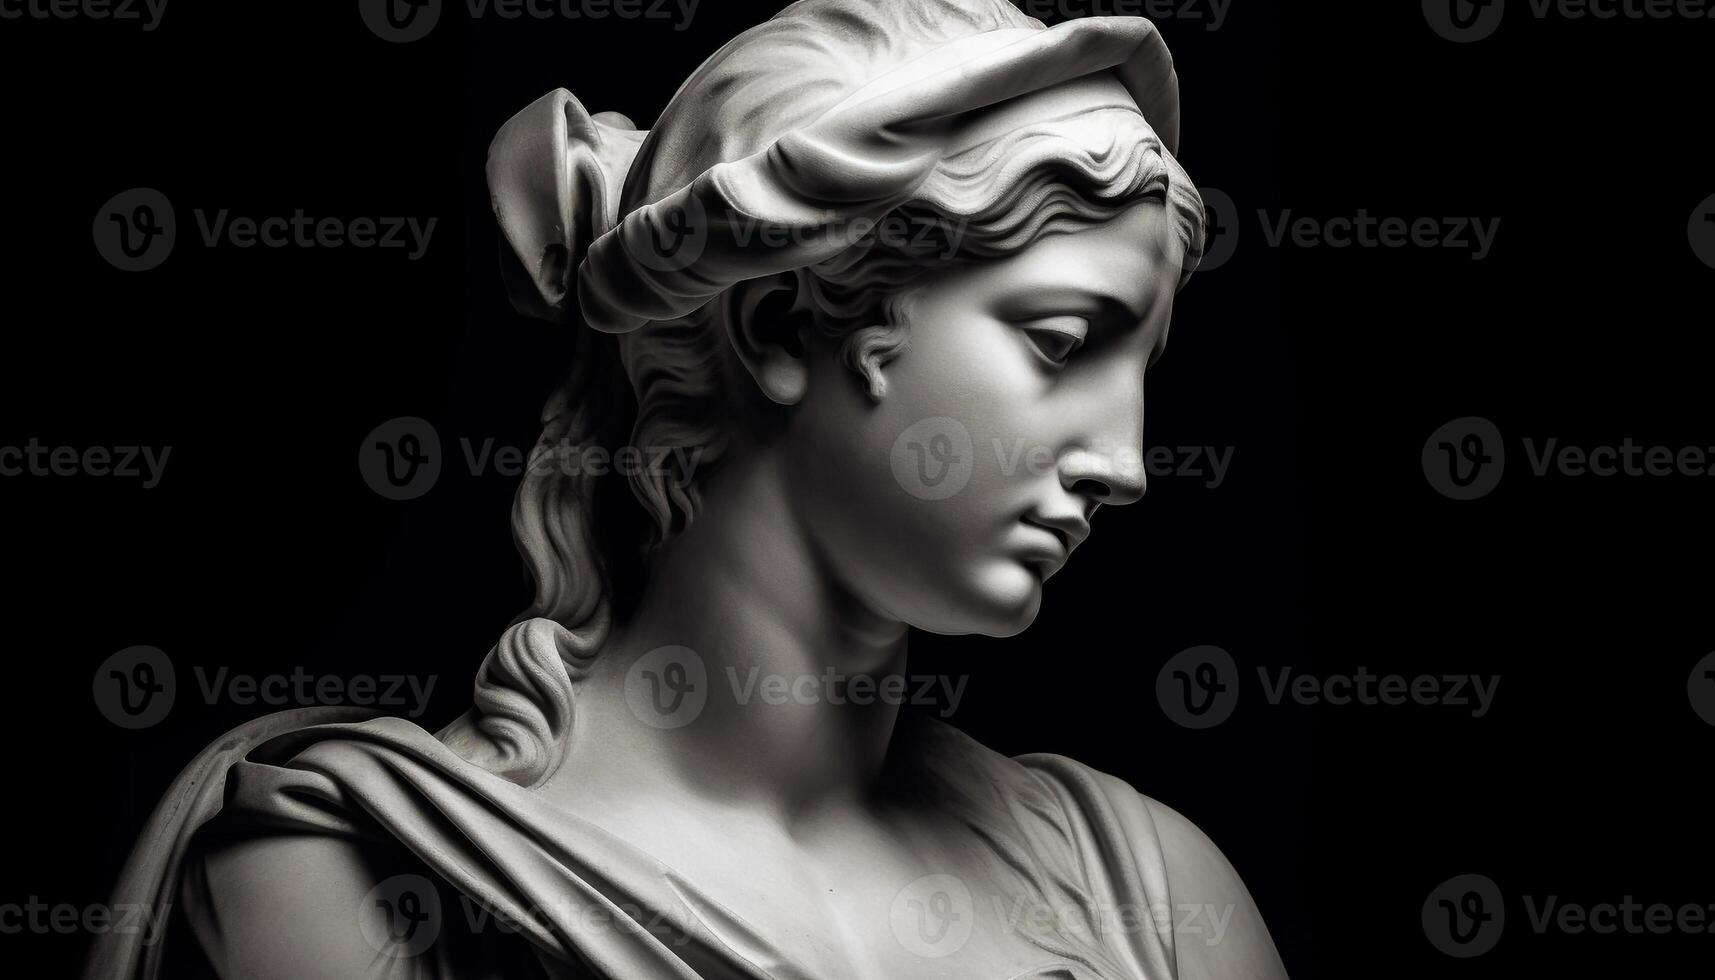 Beautiful Greek sculpture of a sad woman generated by AI photo